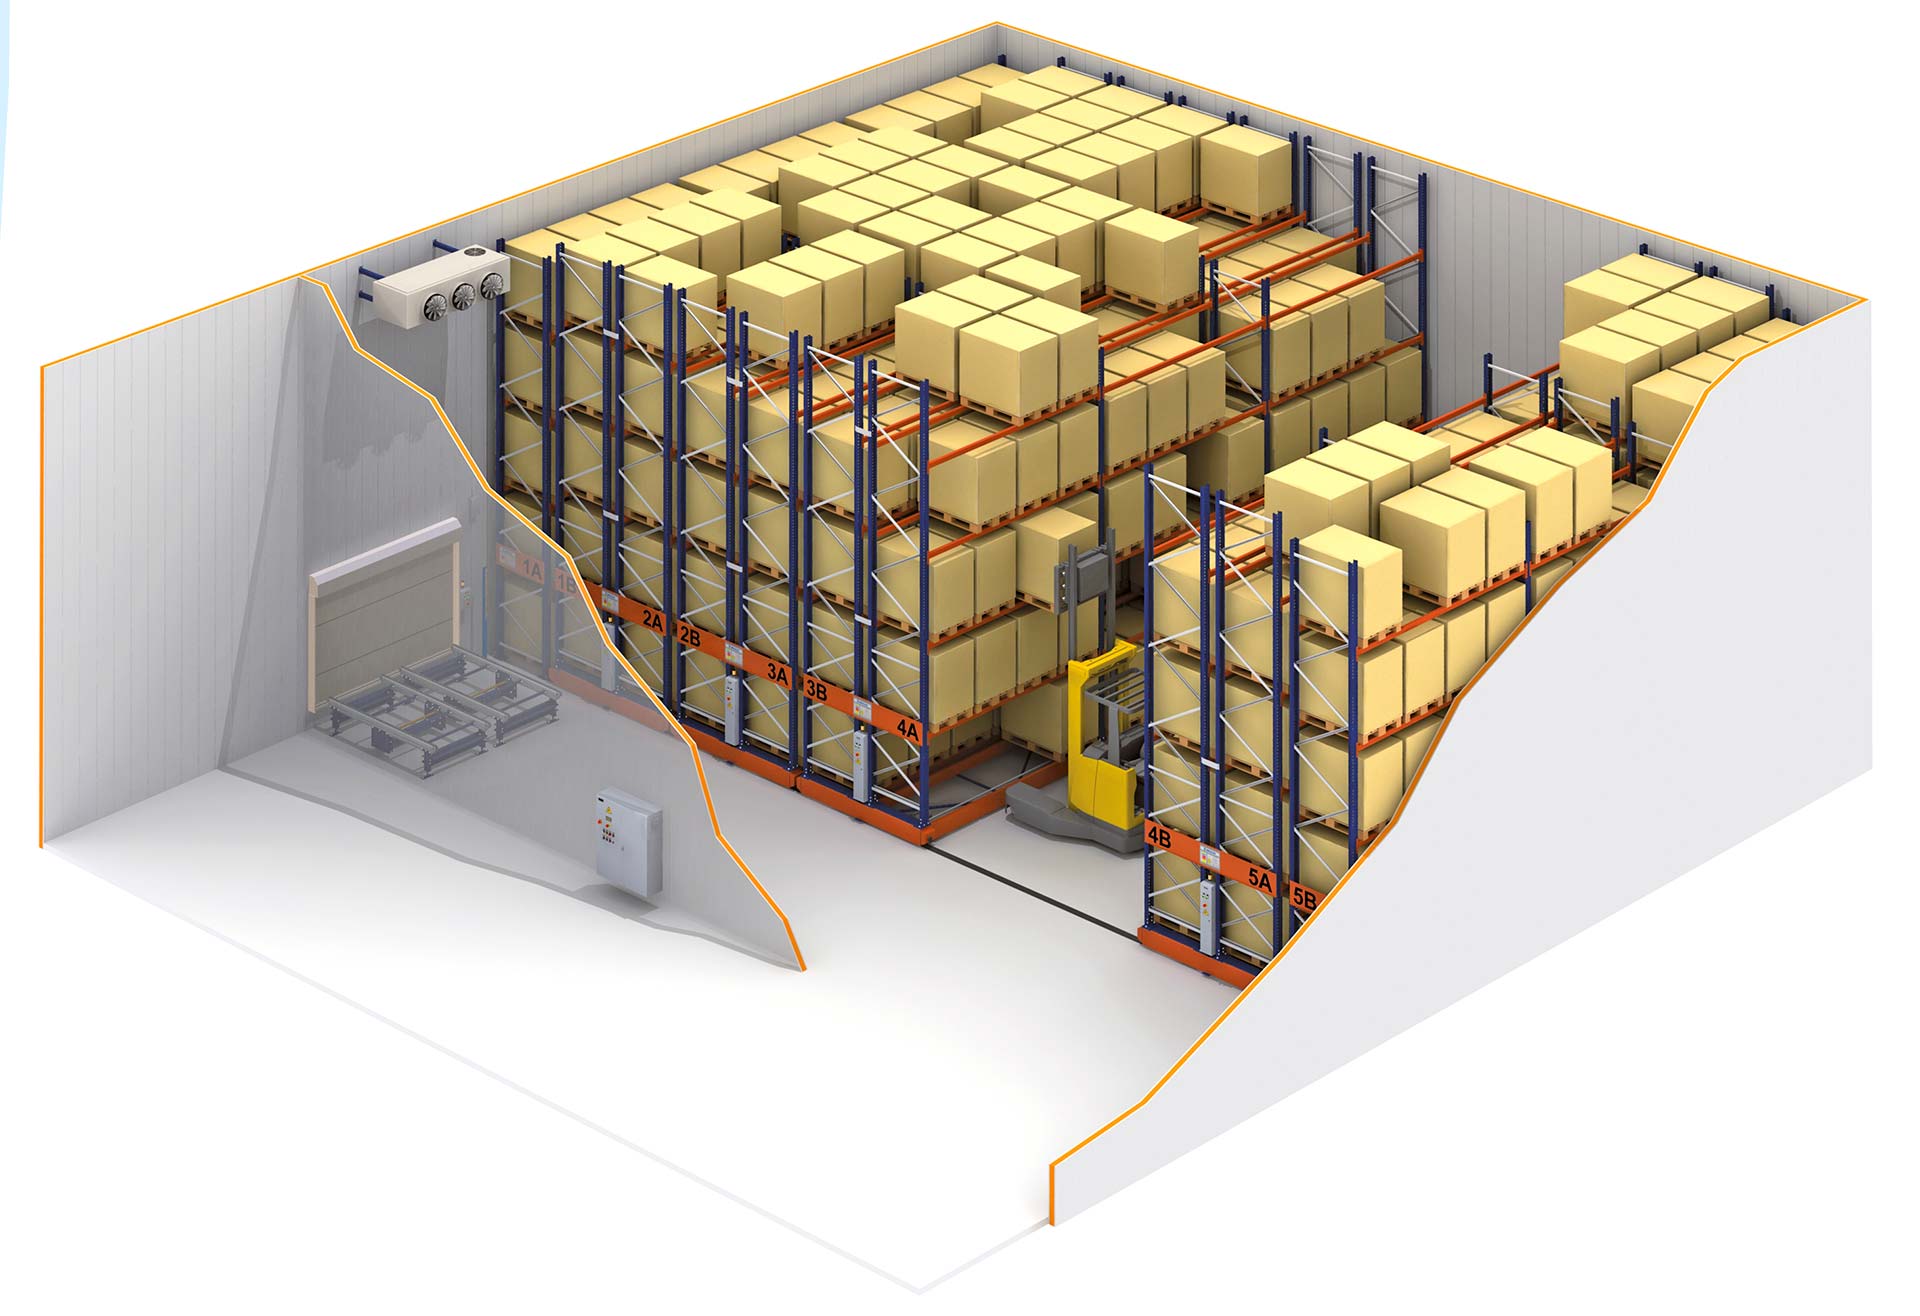 In the case of cold-storage warehouses, mobile pallet racks guarantee maximum storage capacity